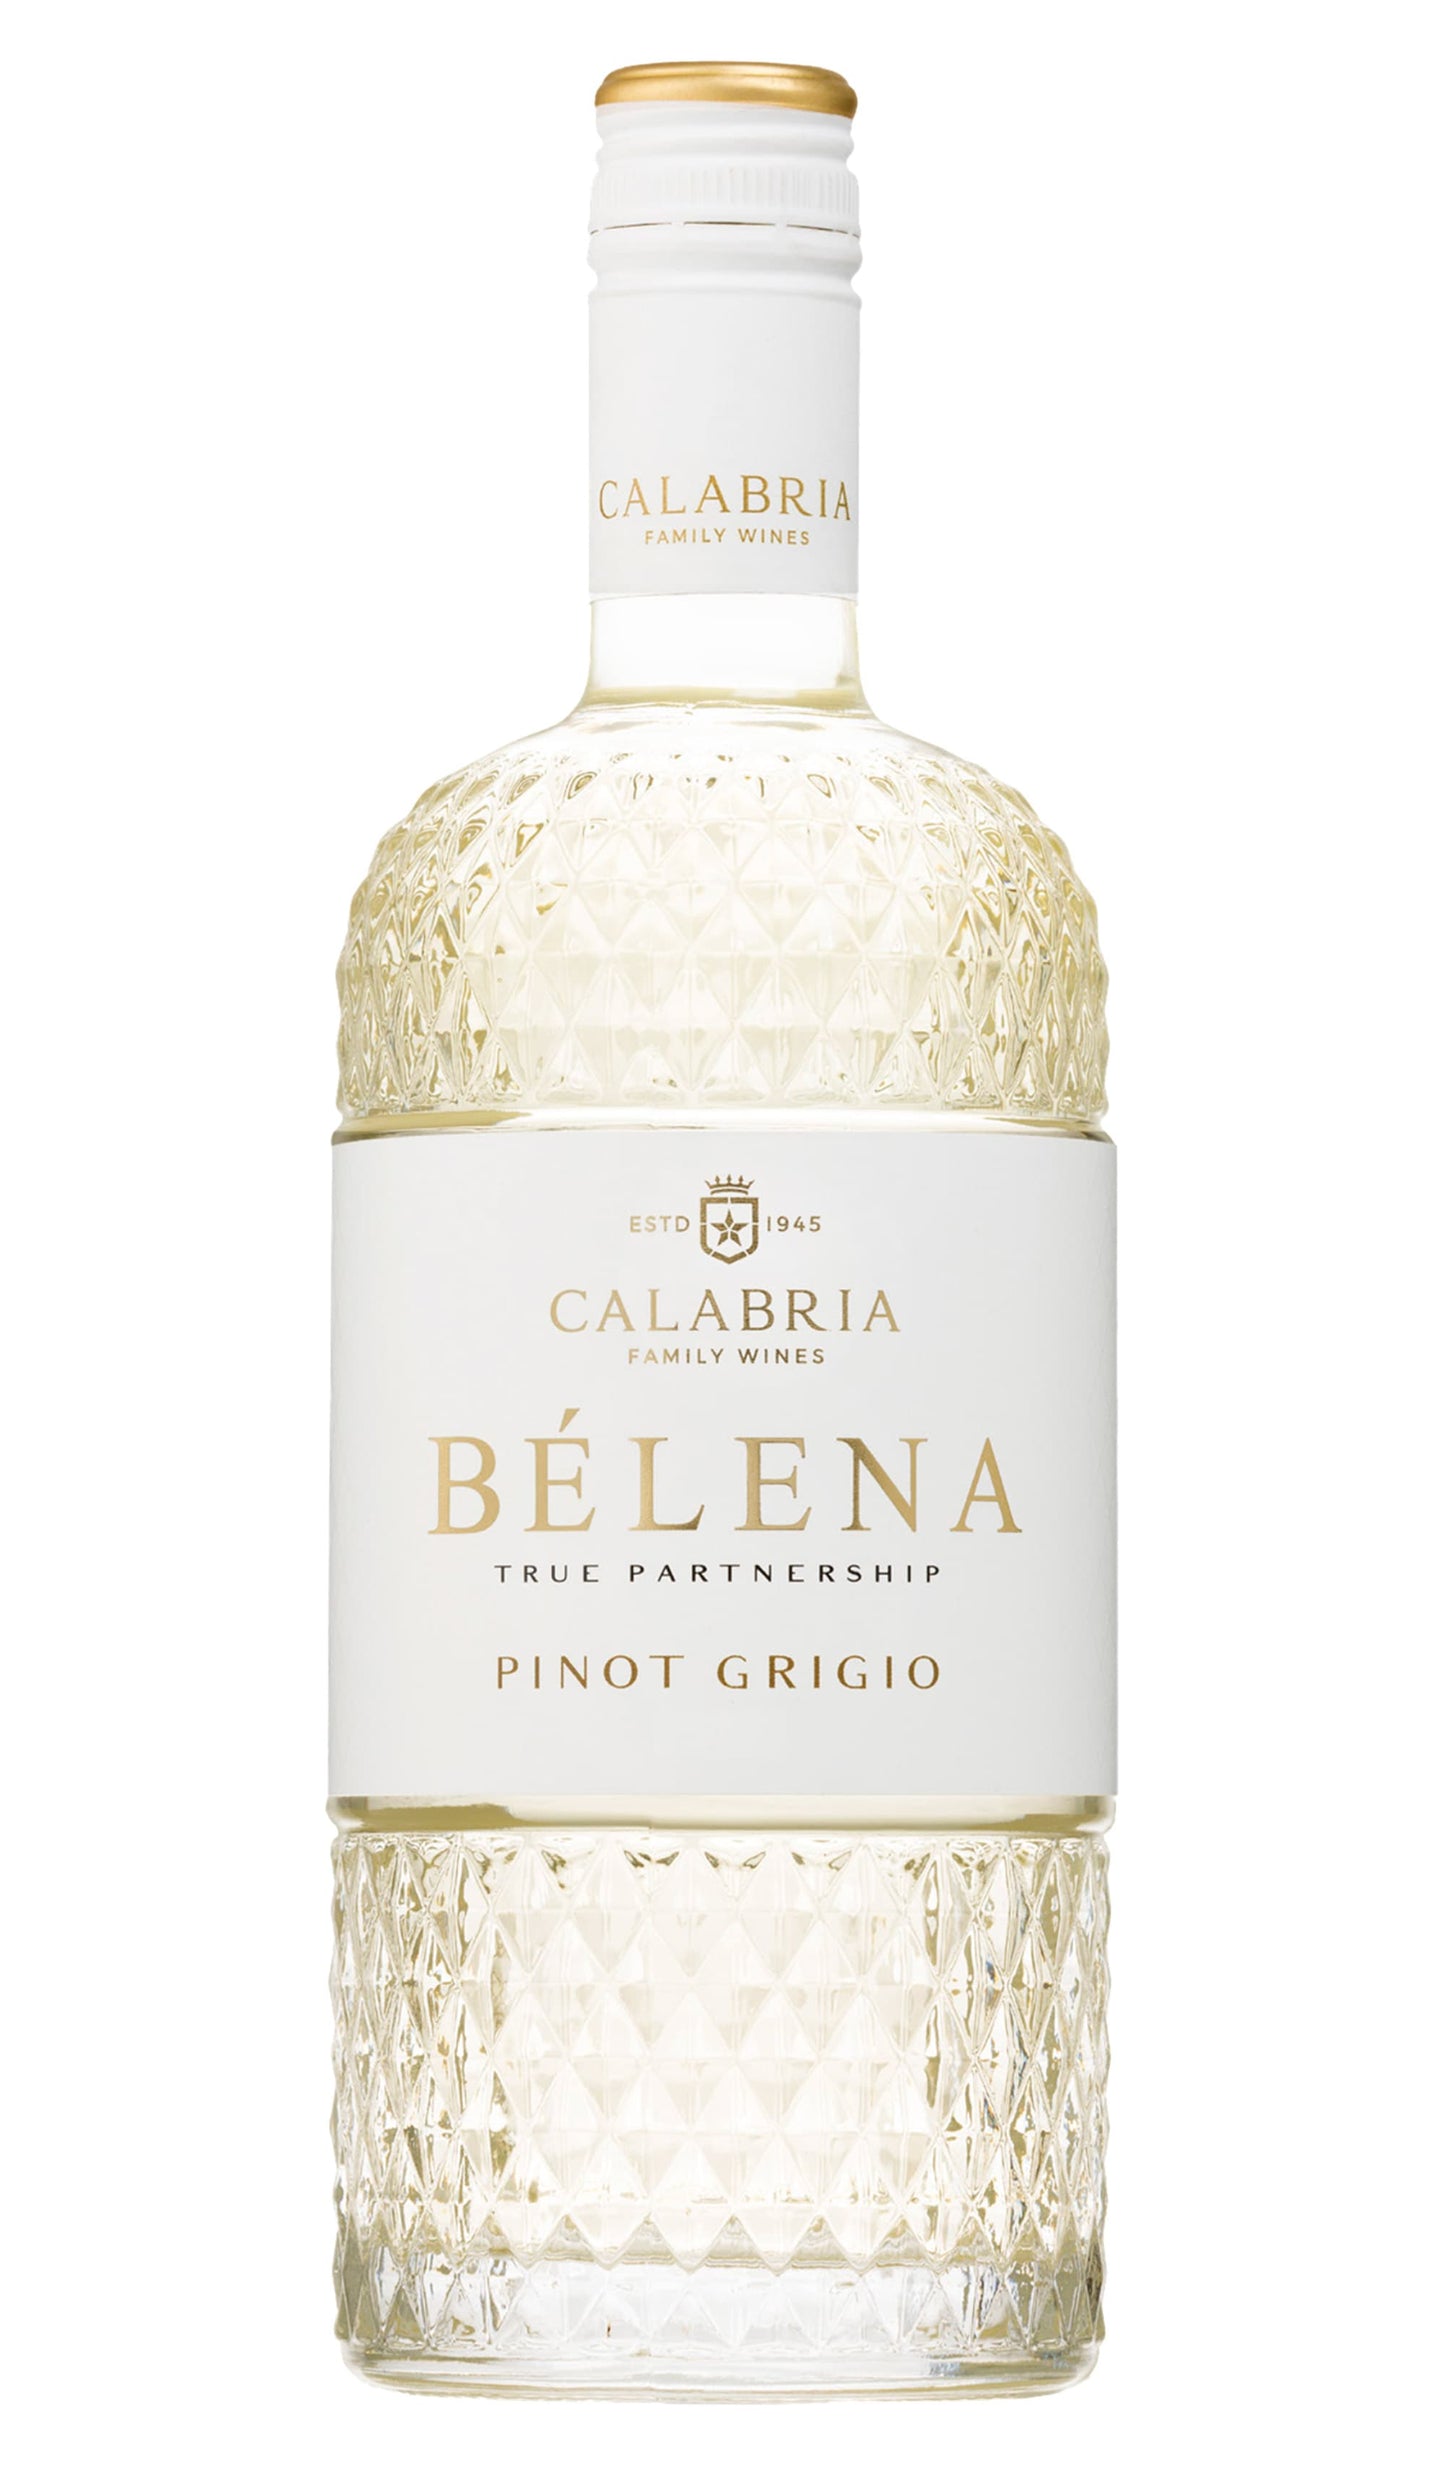 Find out more, explore the range and purchase Calabria Belena Pinot Grigio 2023 (Riverina) available online at Wine Sellers Direct - Australia's independent liquor specialists.